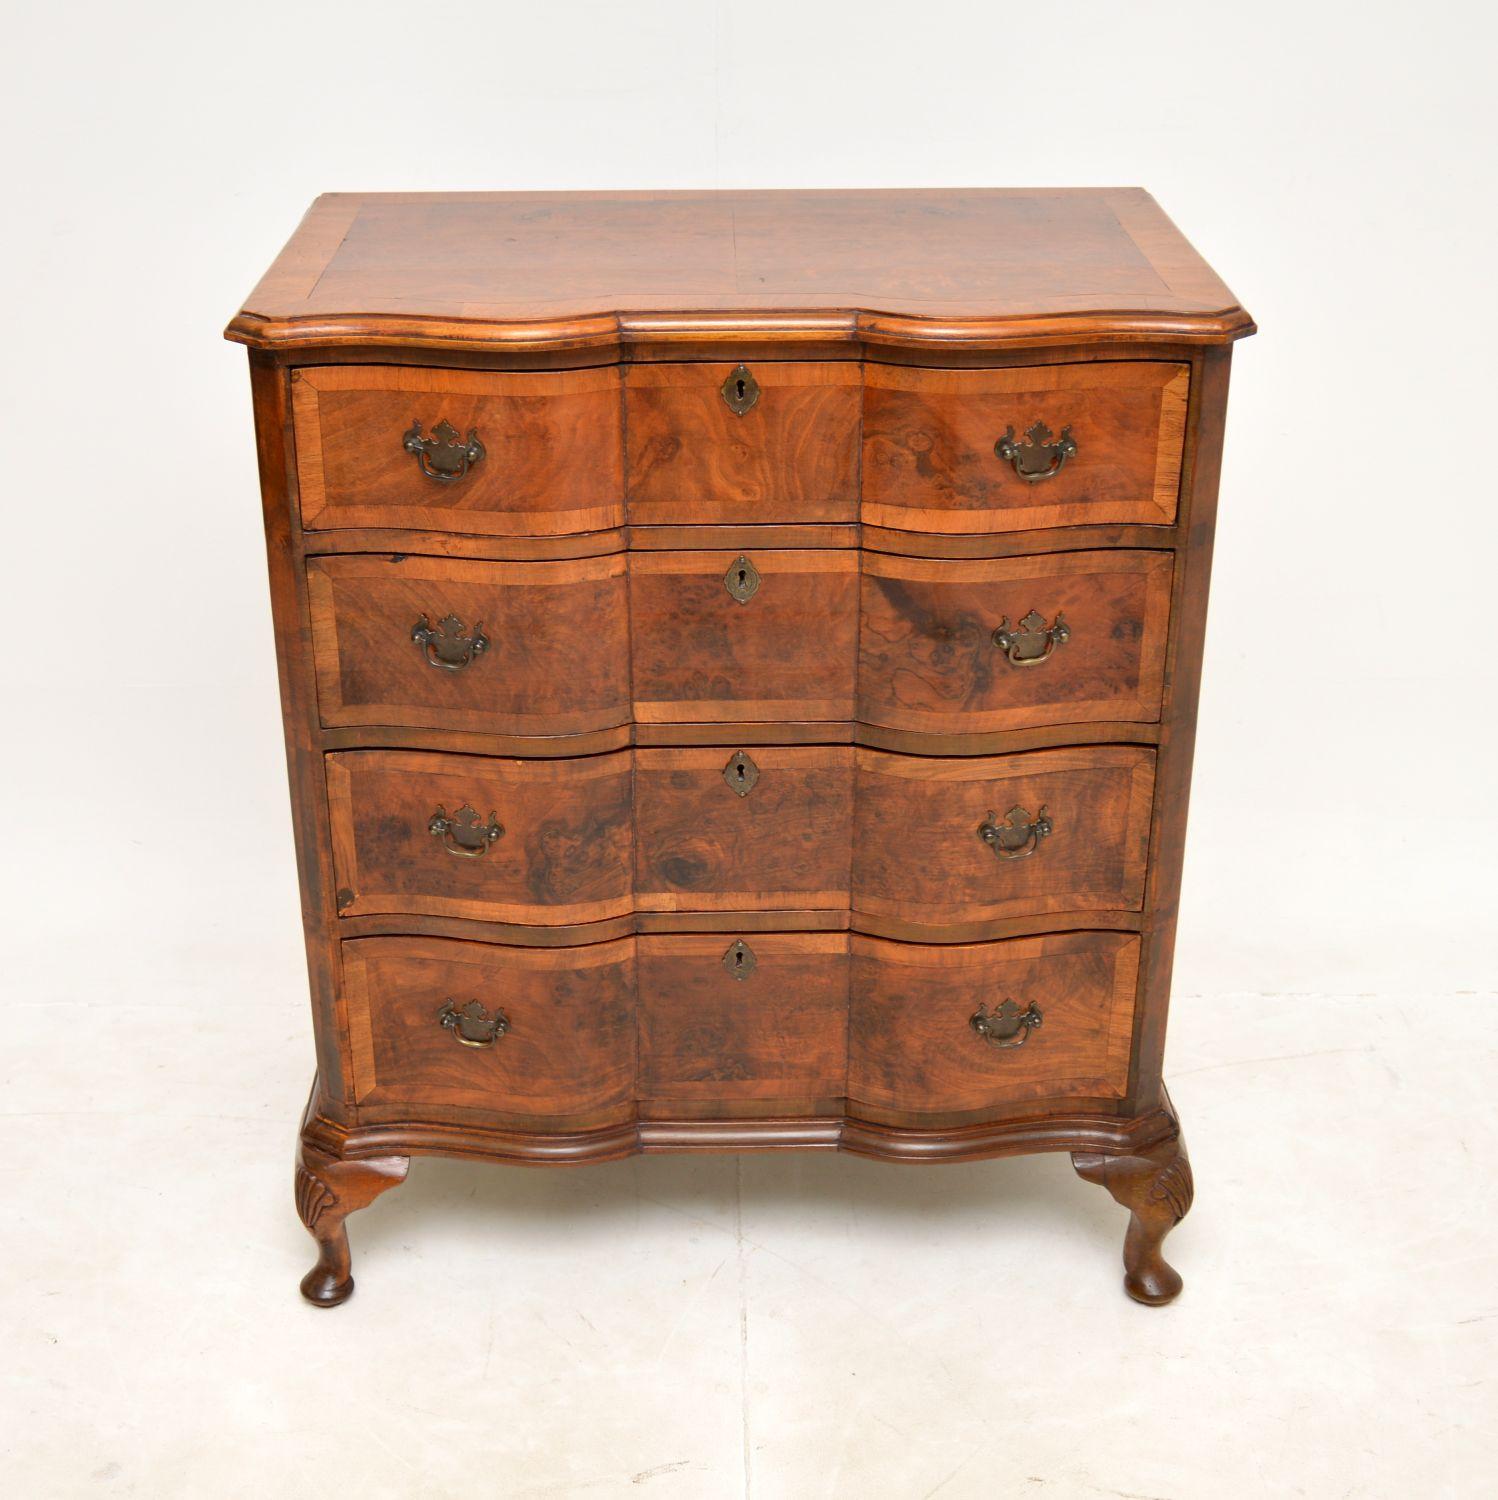 A superb antique chest of drawers in burr walnut, this was made in England, and dates from around the 1900-1910 period.

It is of amazing quality, with a beautiful serpentine shaped front and stunning burr walnut grain patterns. This sits on short